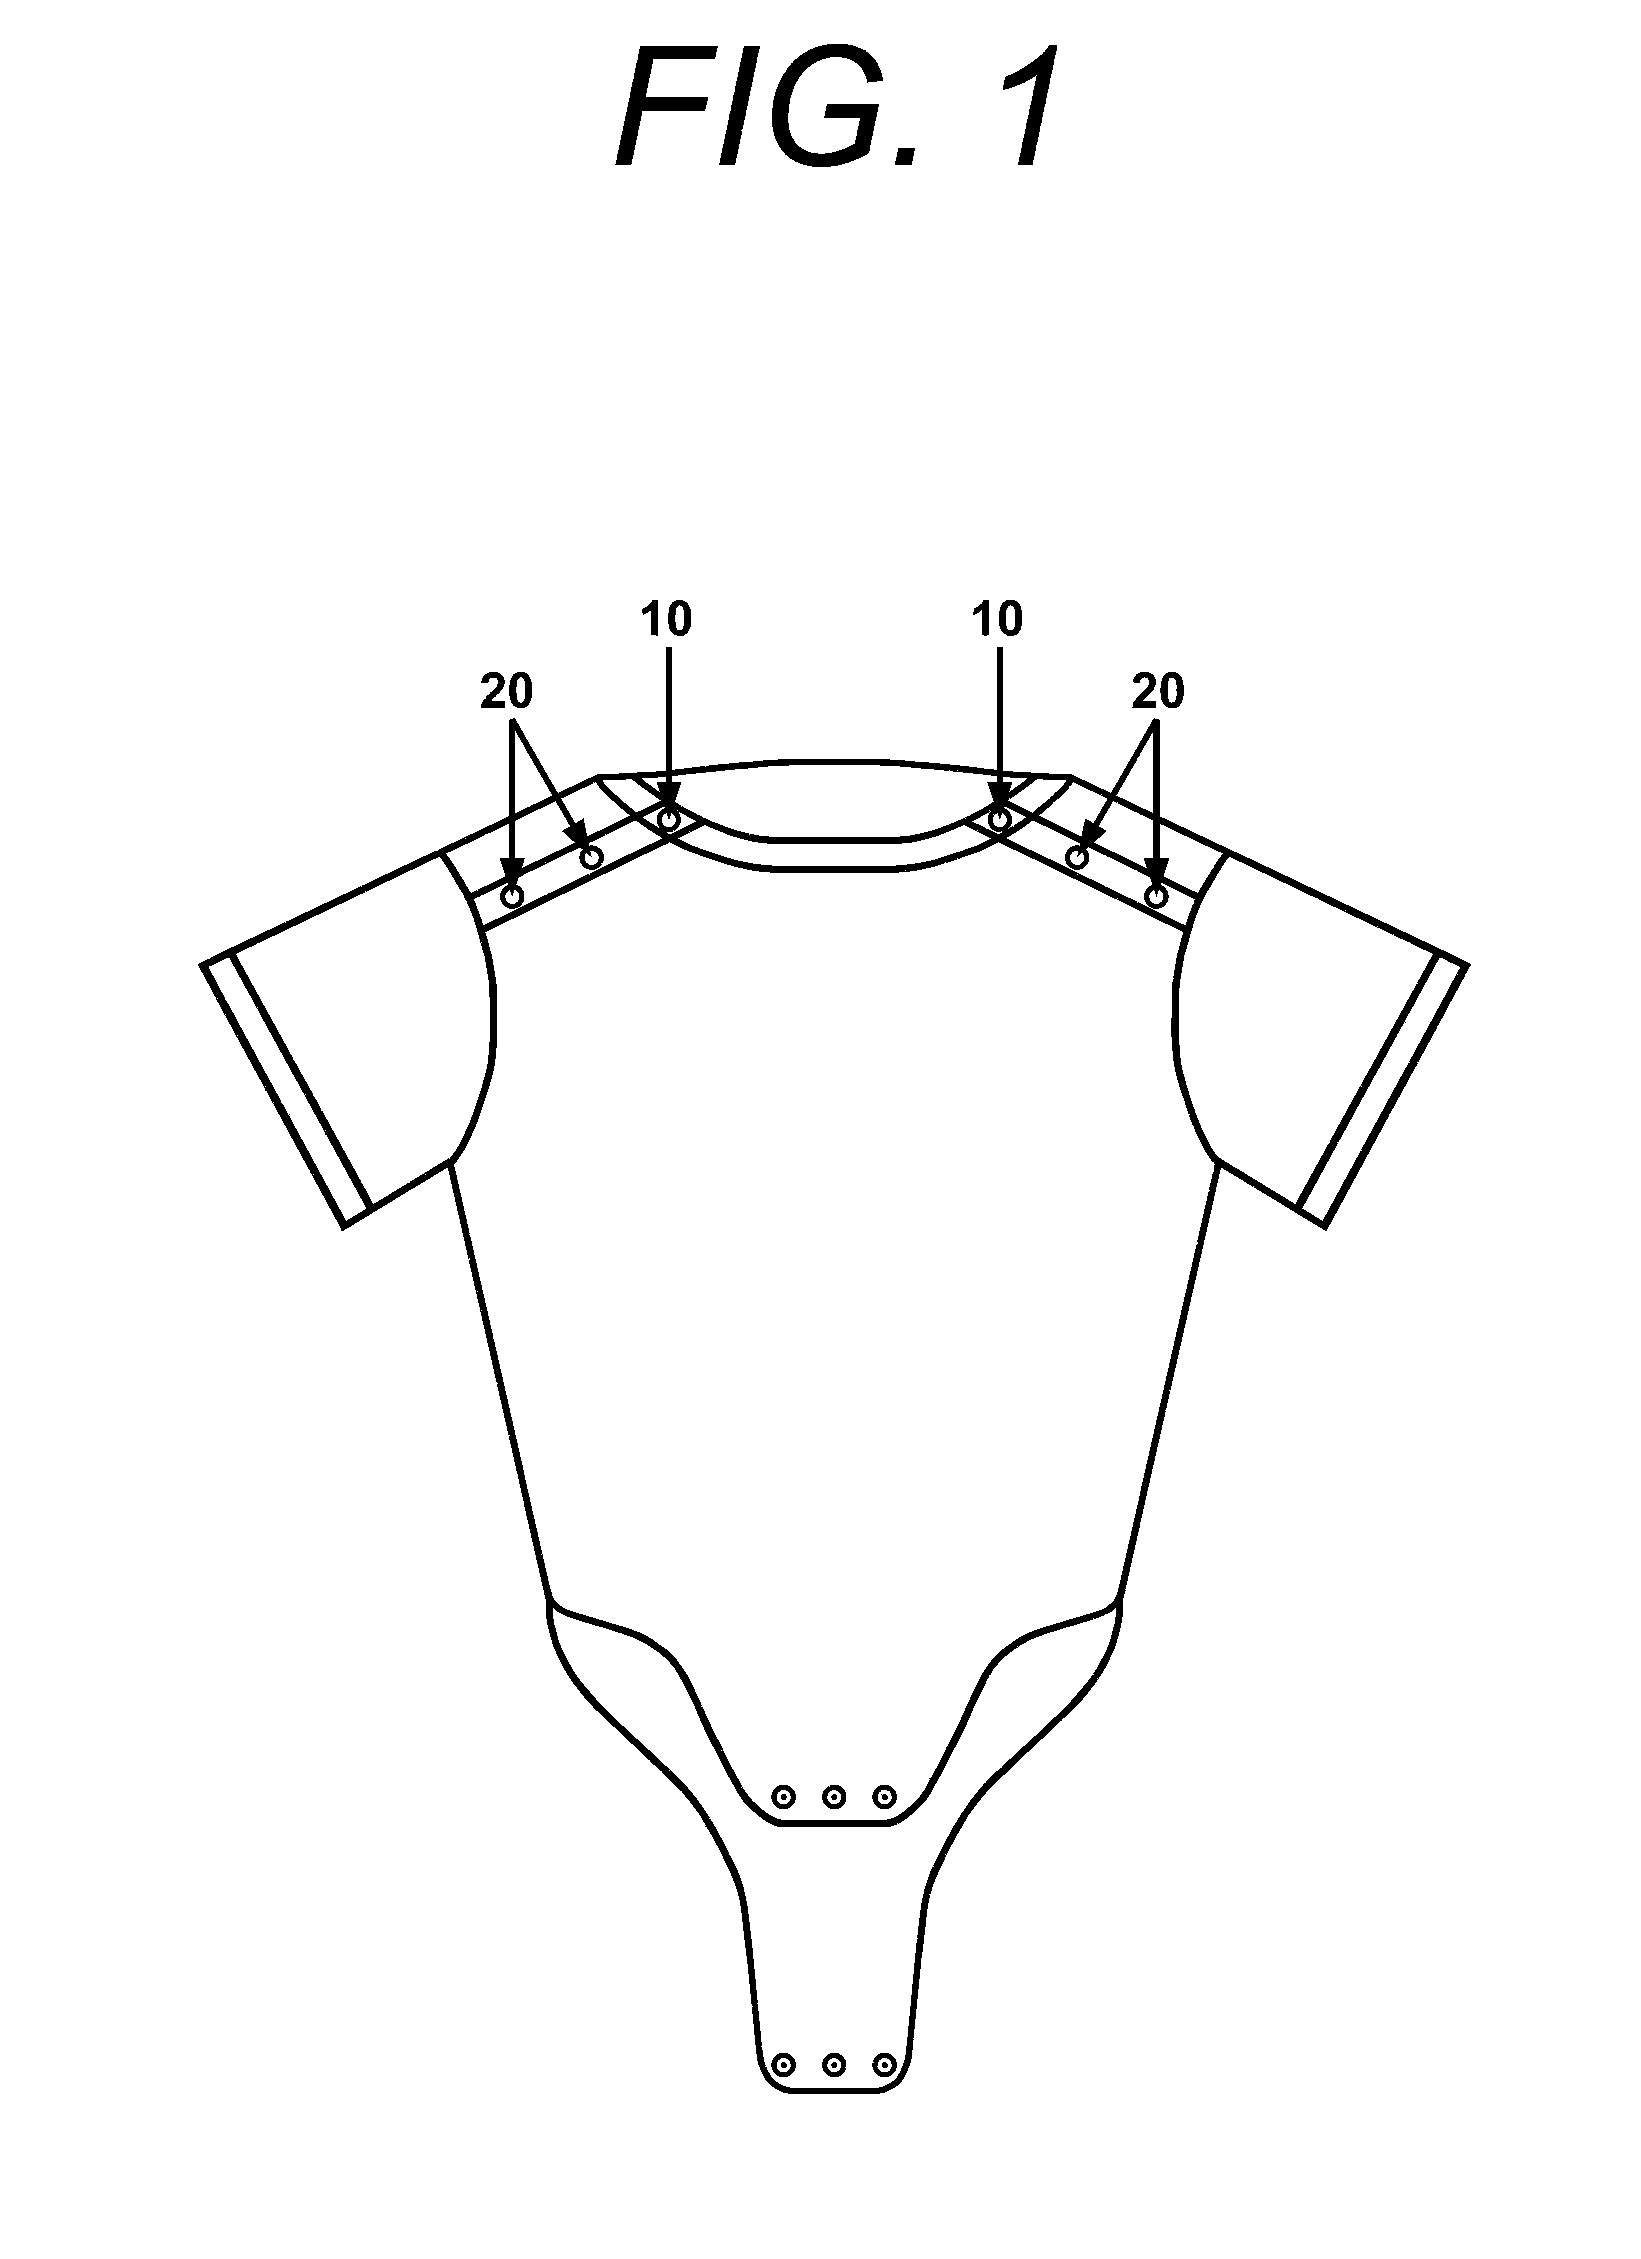 Garments with front opening seams